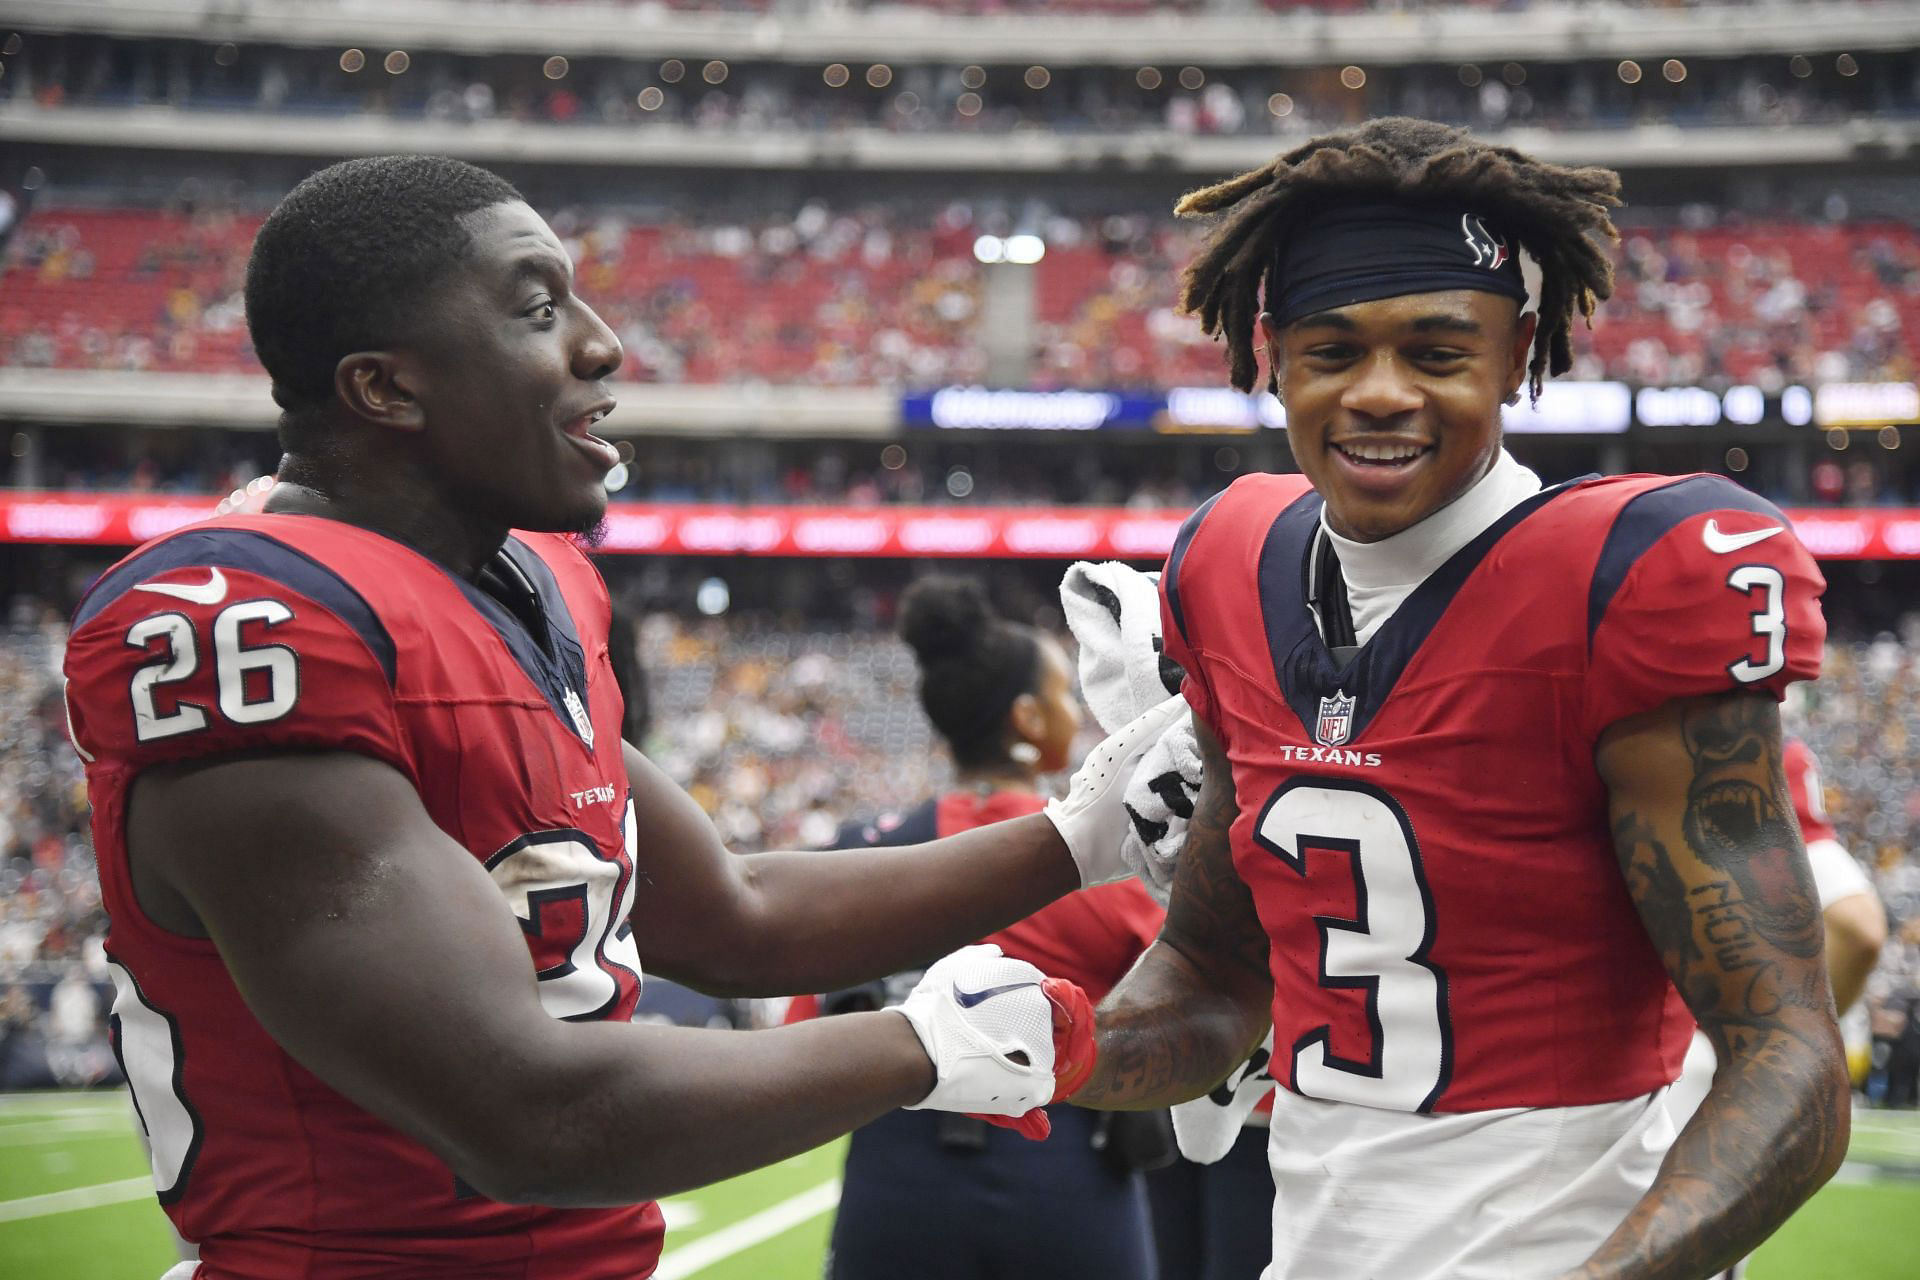 Tank Dell injury update: Latest on Texans WR for Week 6